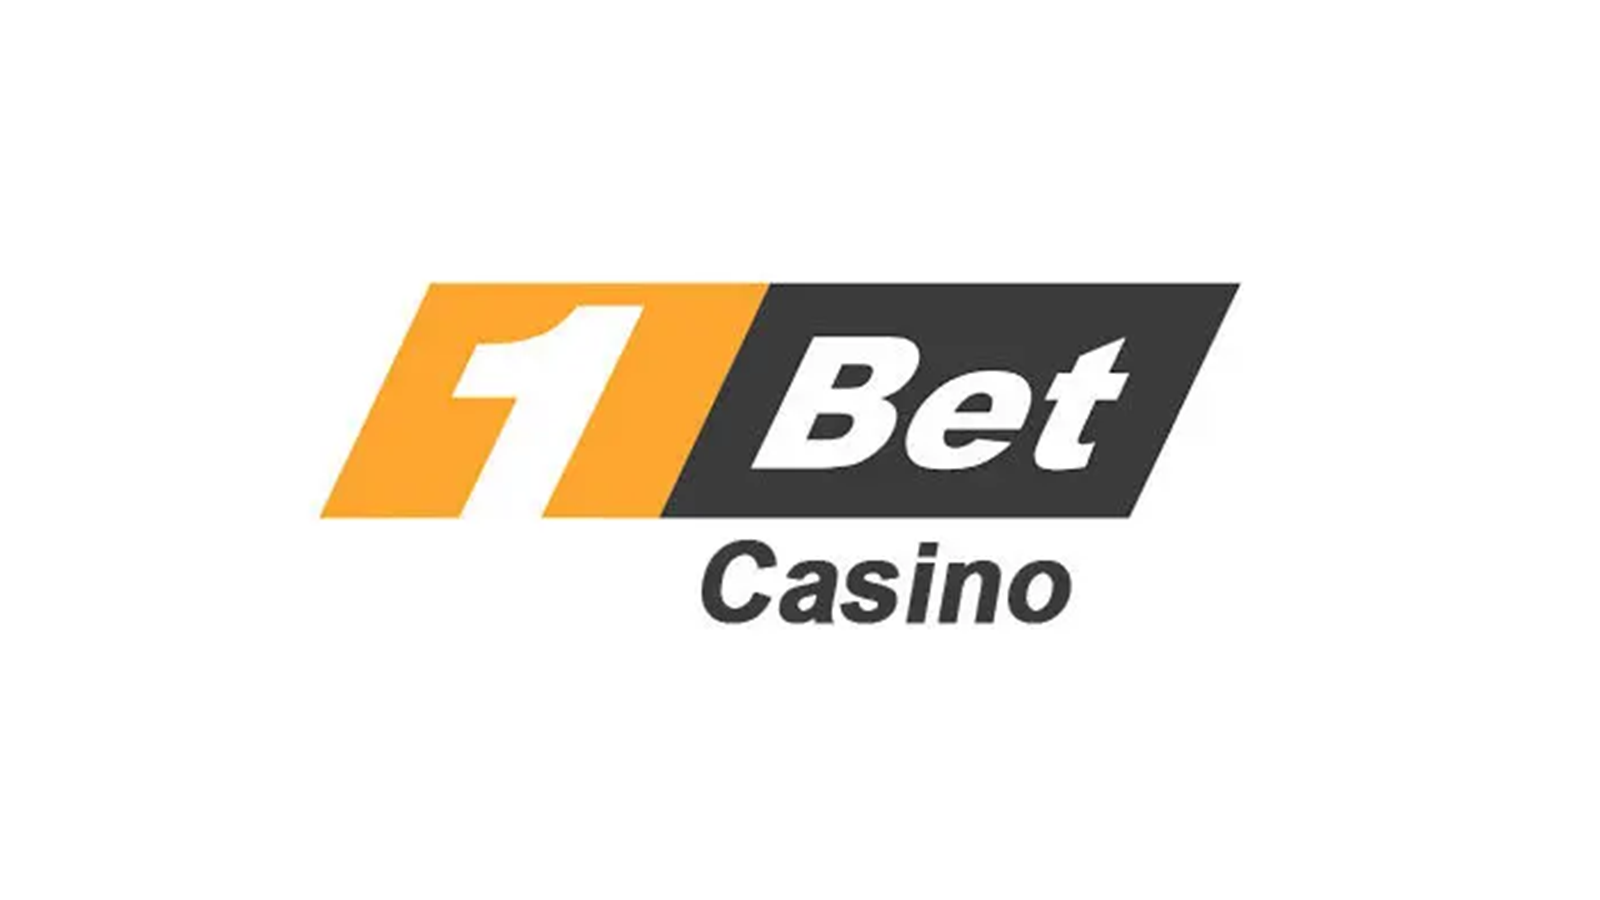 1Bet Casino Review - Your Ultimate Guide